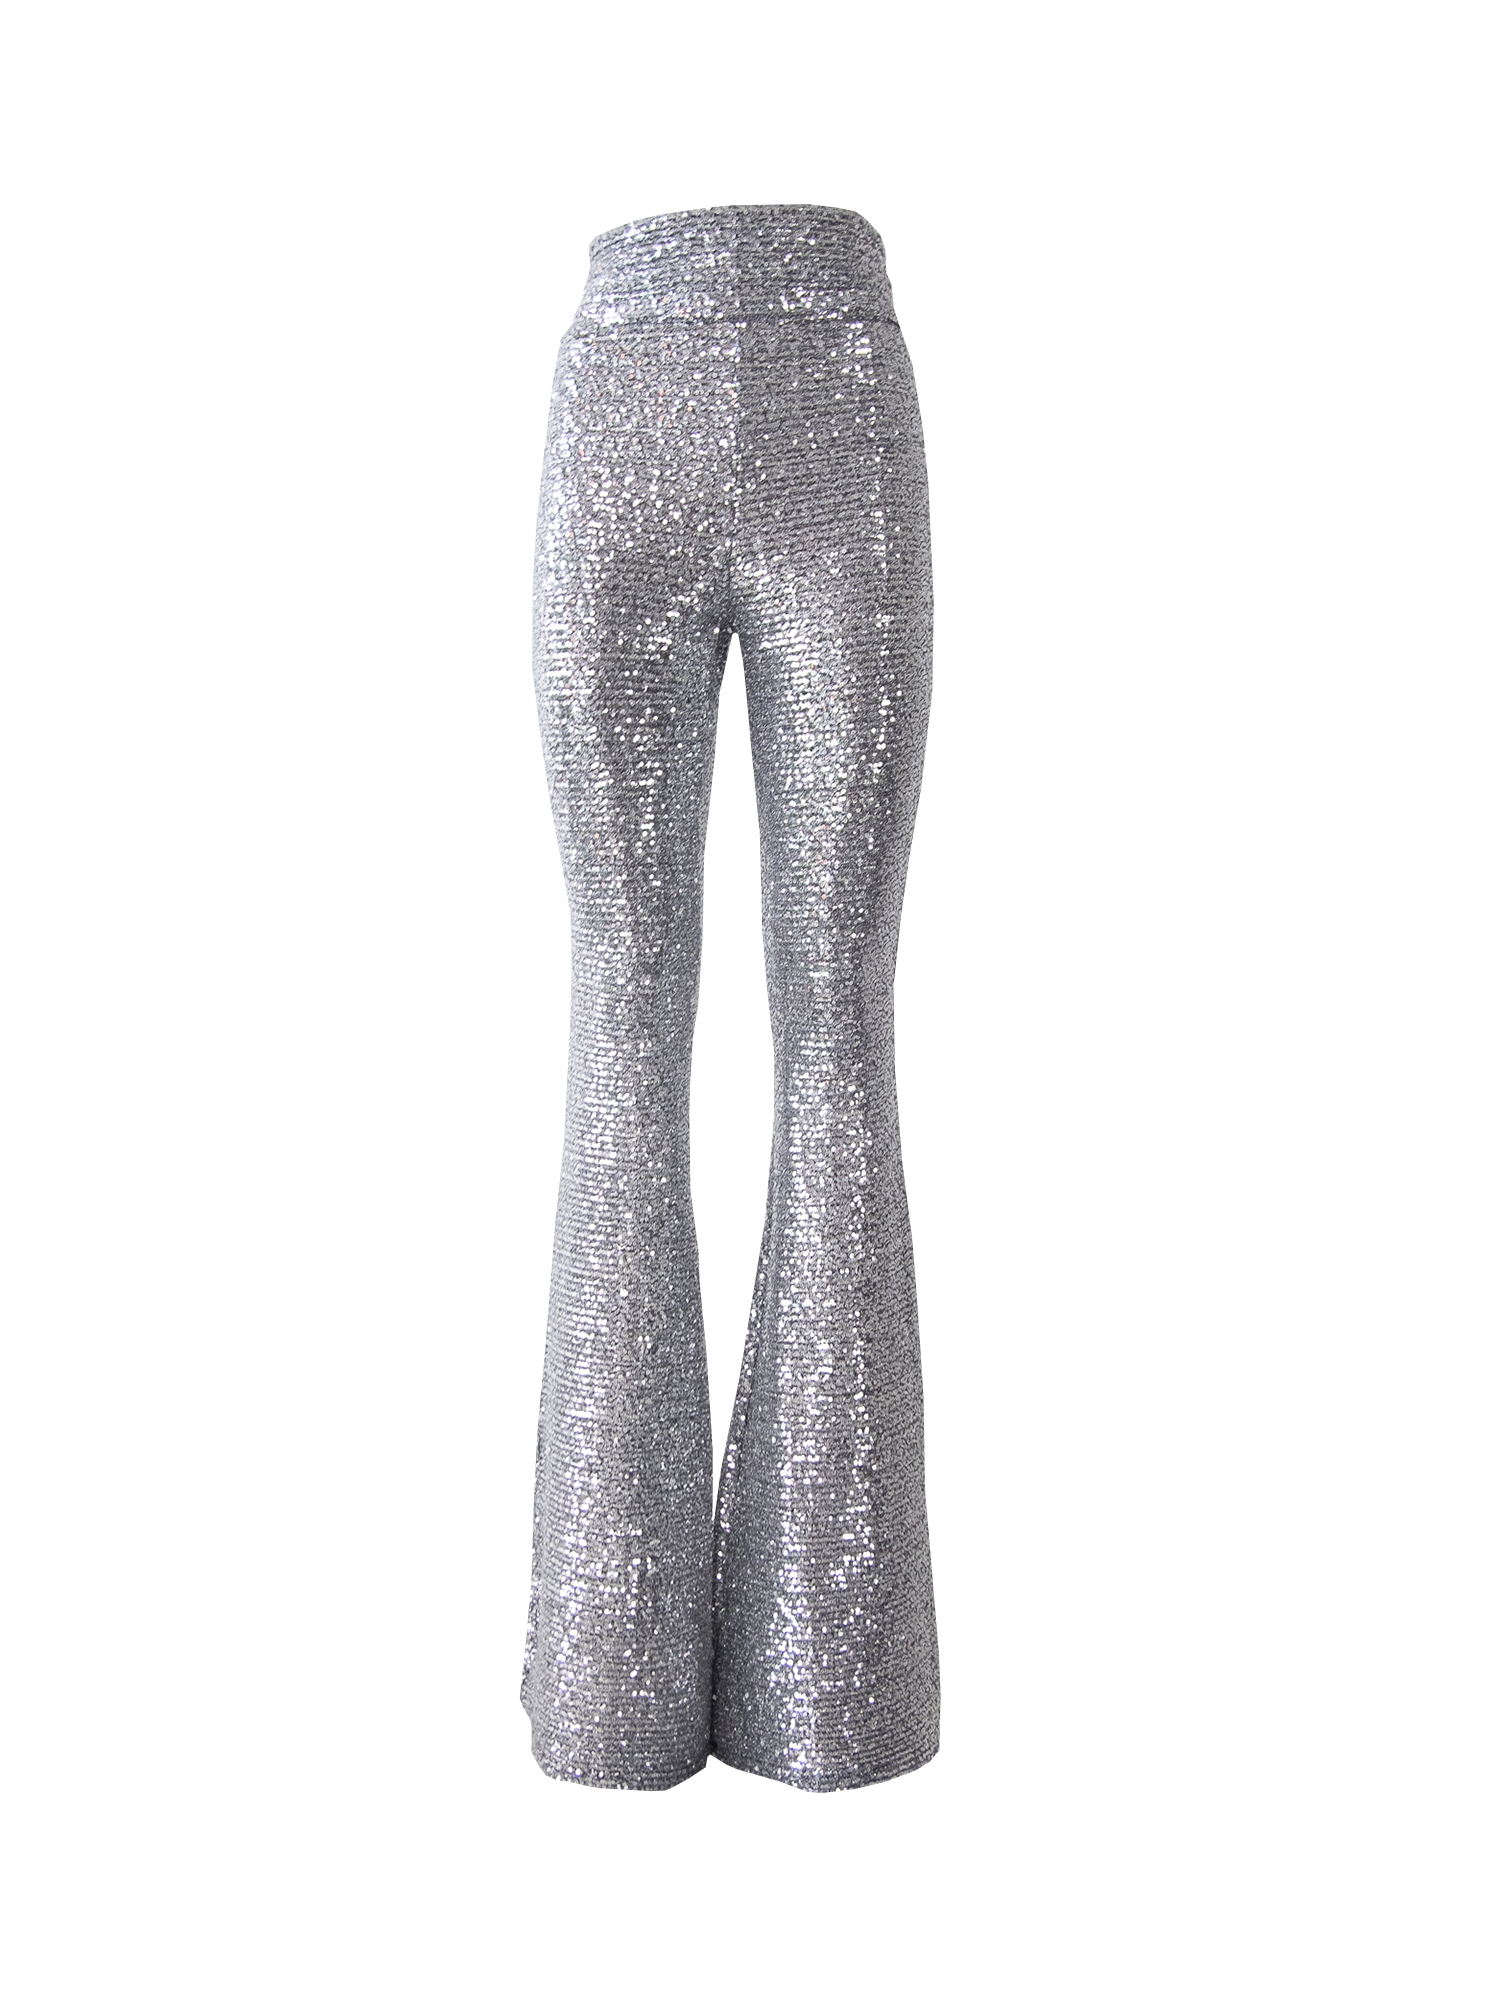 LOLA - flared pants in silver sequins